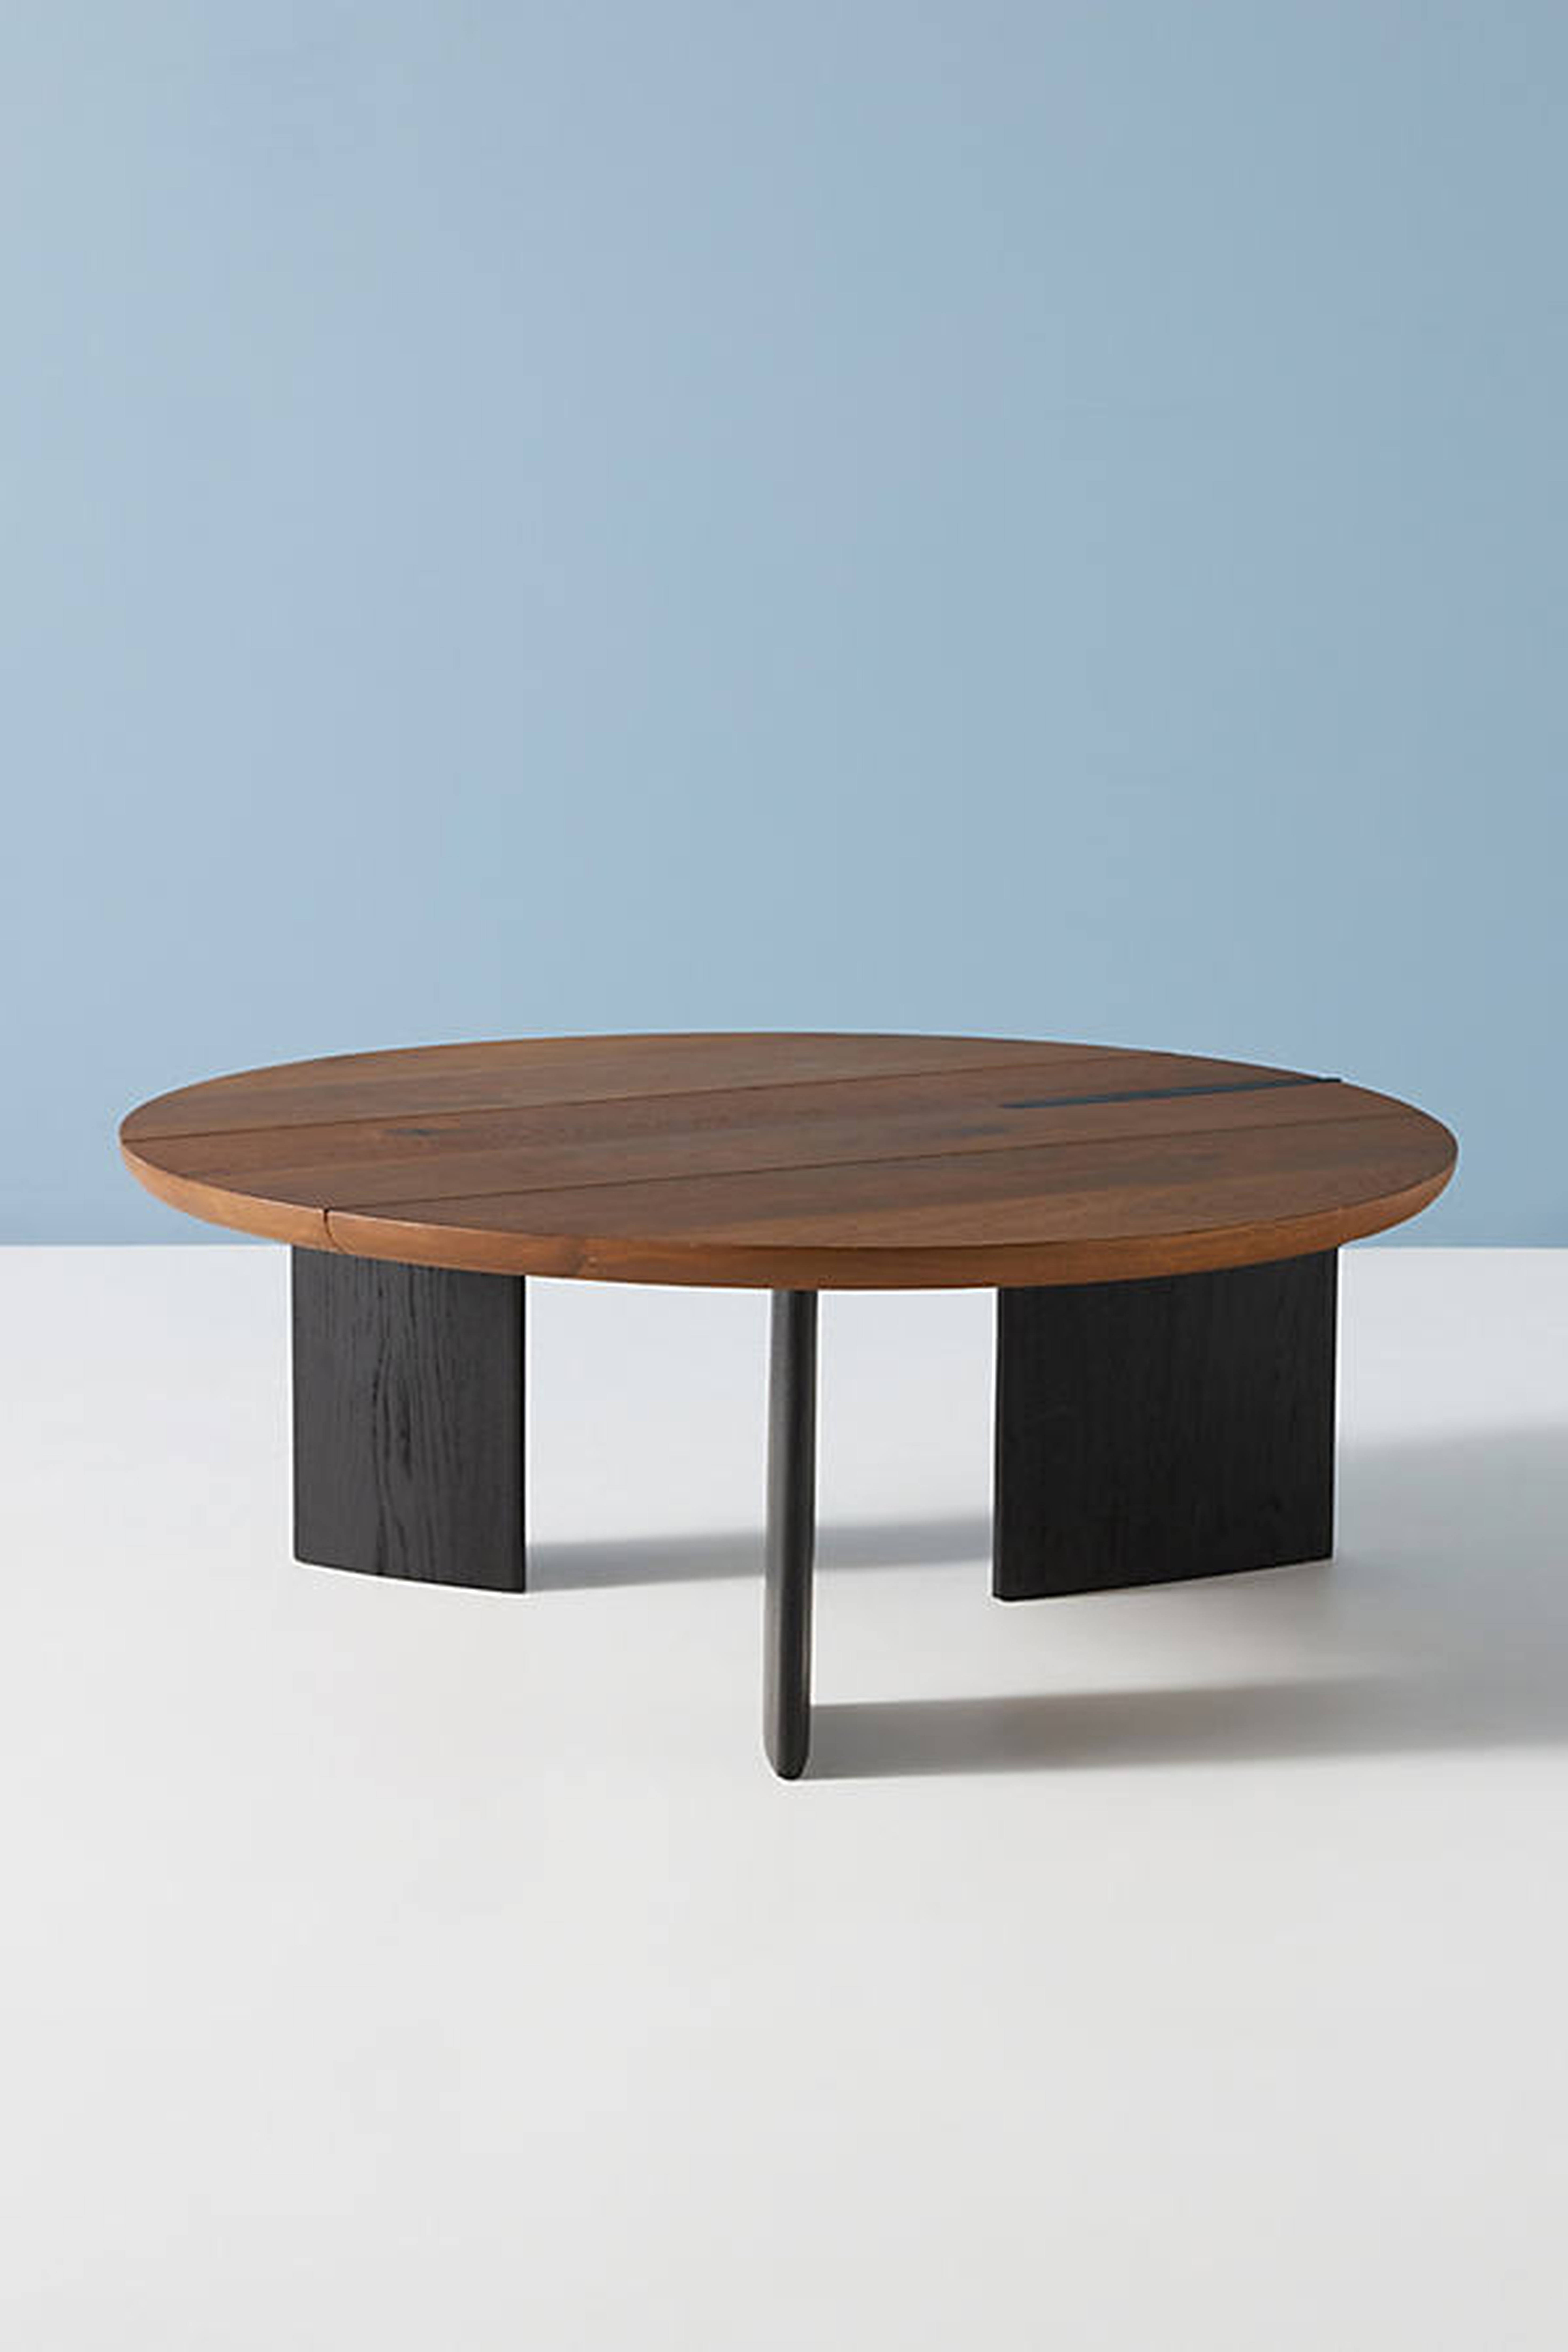 Shona Coffee Table By Anthropologie in Brown - Anthropologie